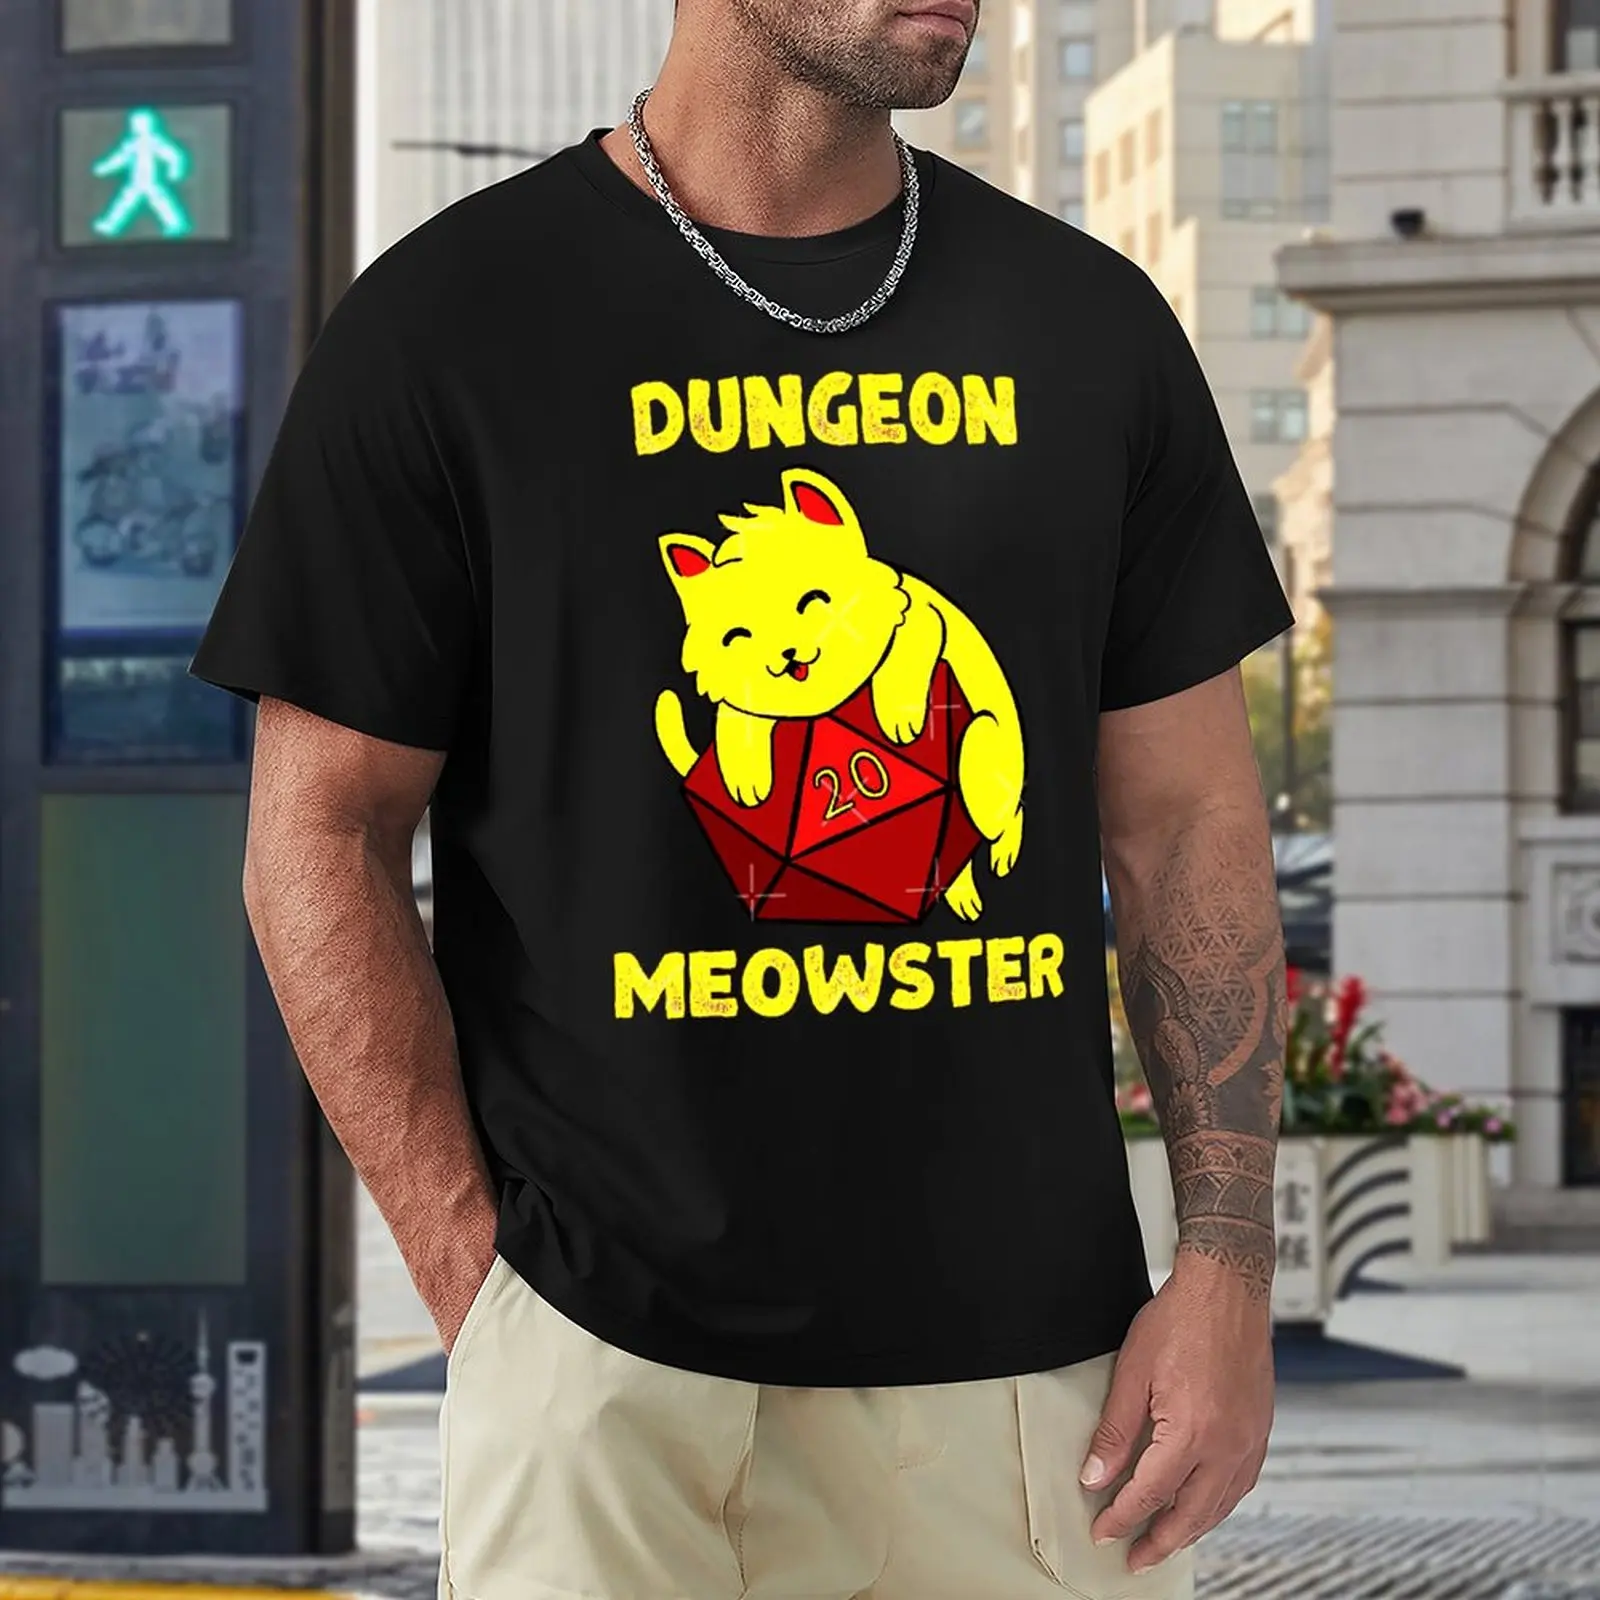 

Dungeon And Meowster Funny DnD Tabletop Gamer Cat D20 (3) T-shirt Harajuku Motion Funny Sarcastic Tees Hipster Travel USA Size